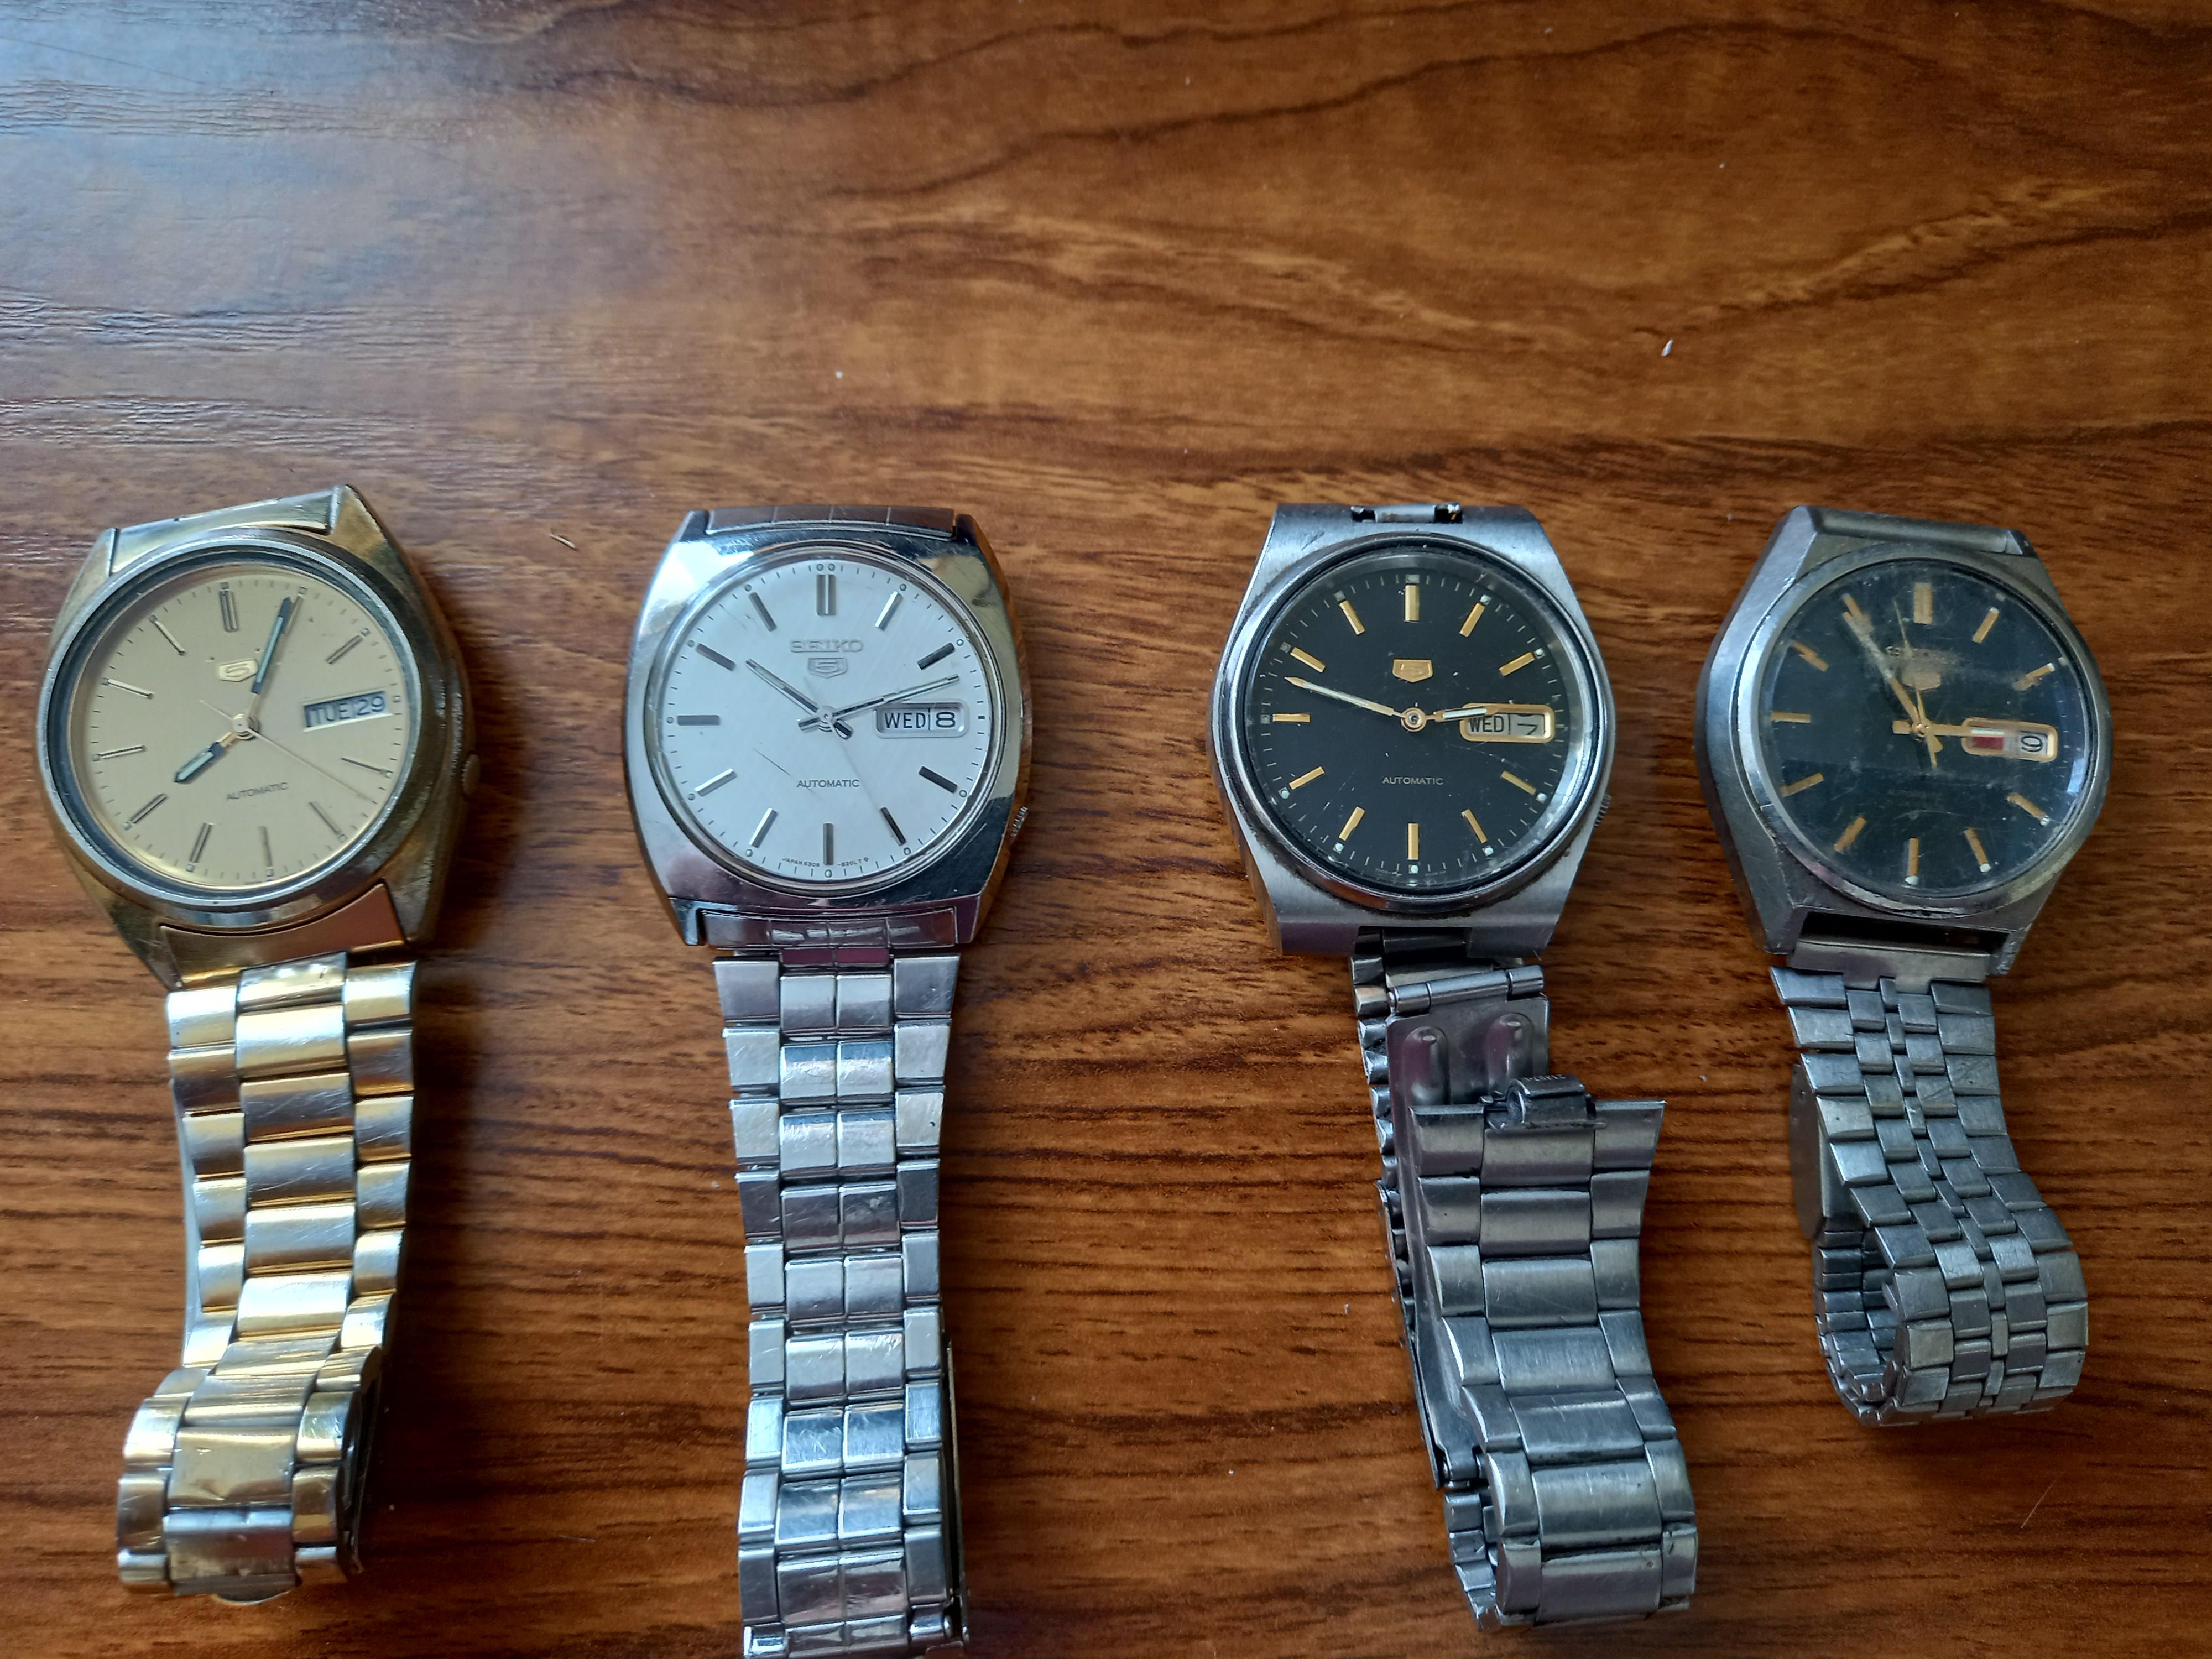 Unusual Seiko Crystal - Your Watch Collection - Watch Repair Talk